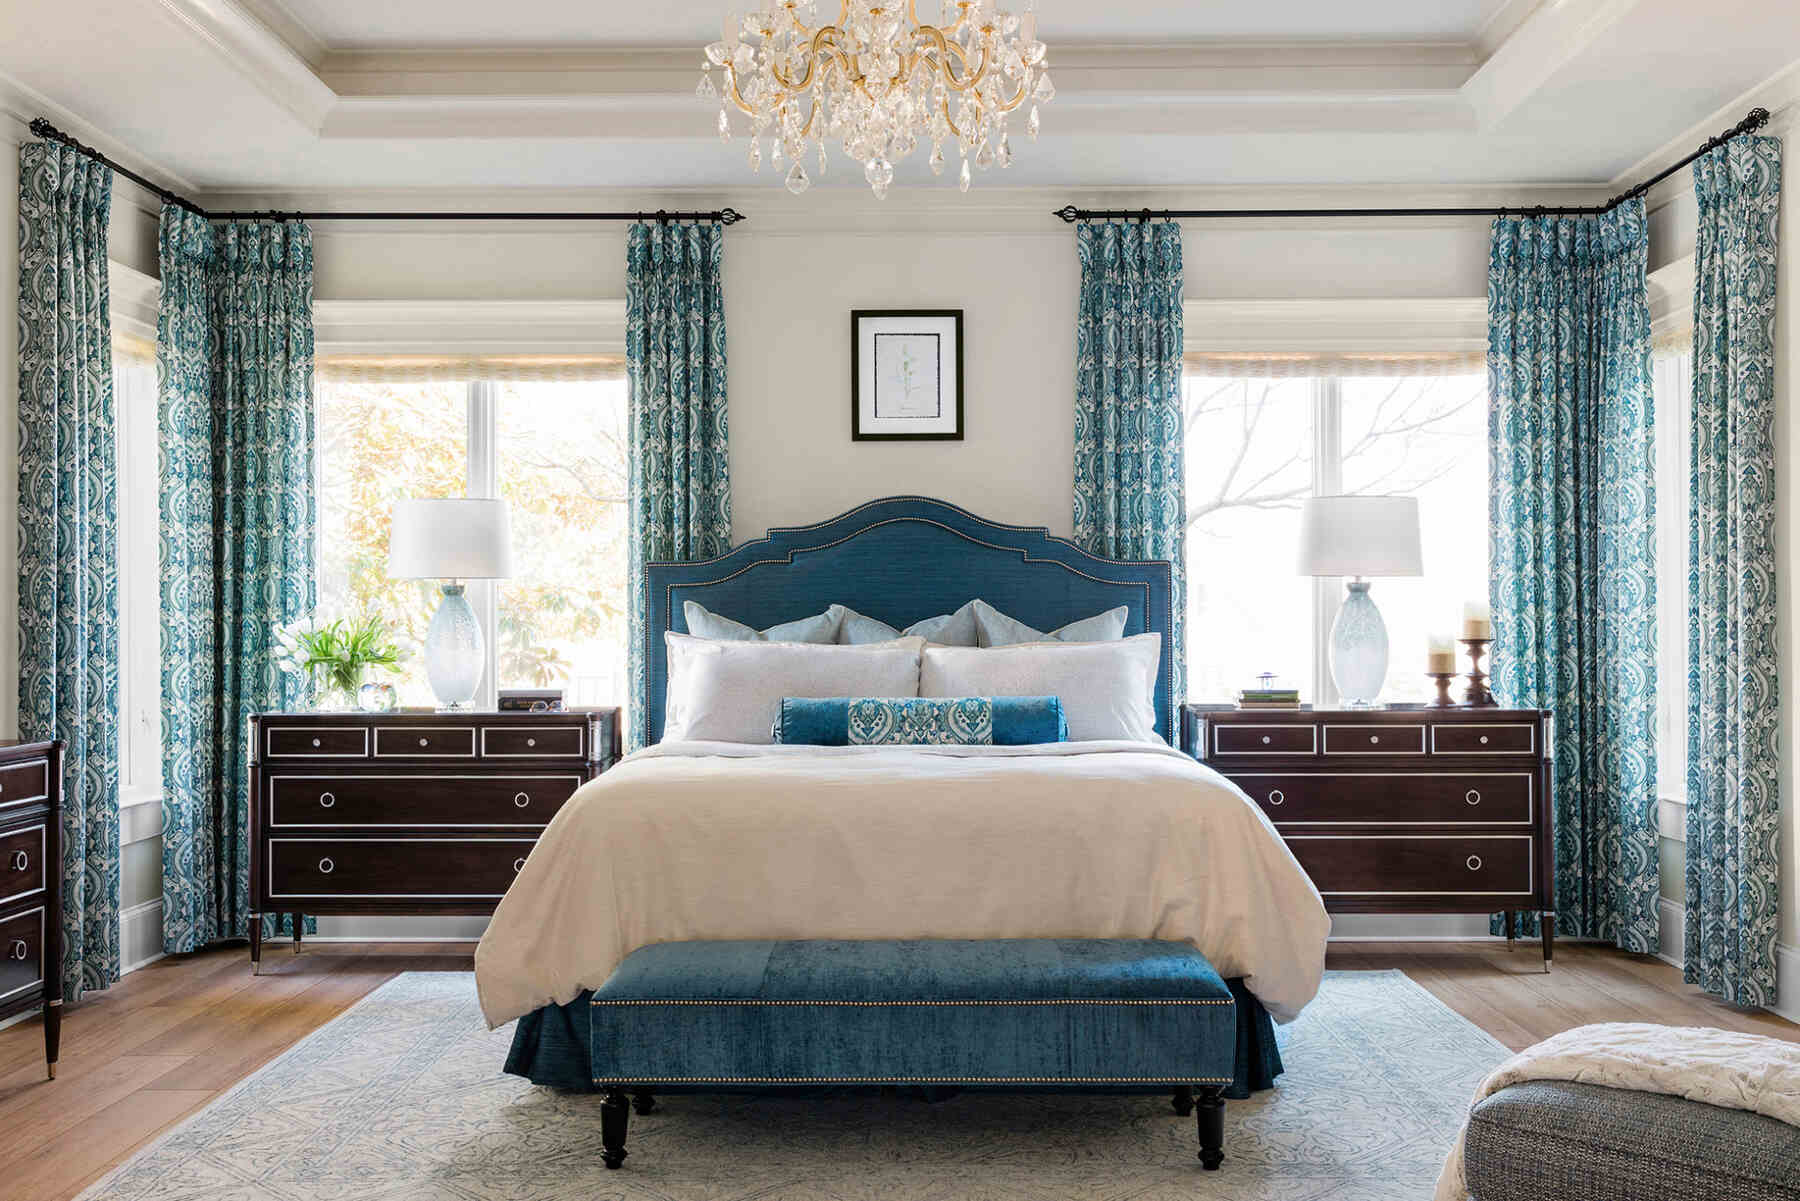 A cozy bedroom with a soothing blue and white color scheme